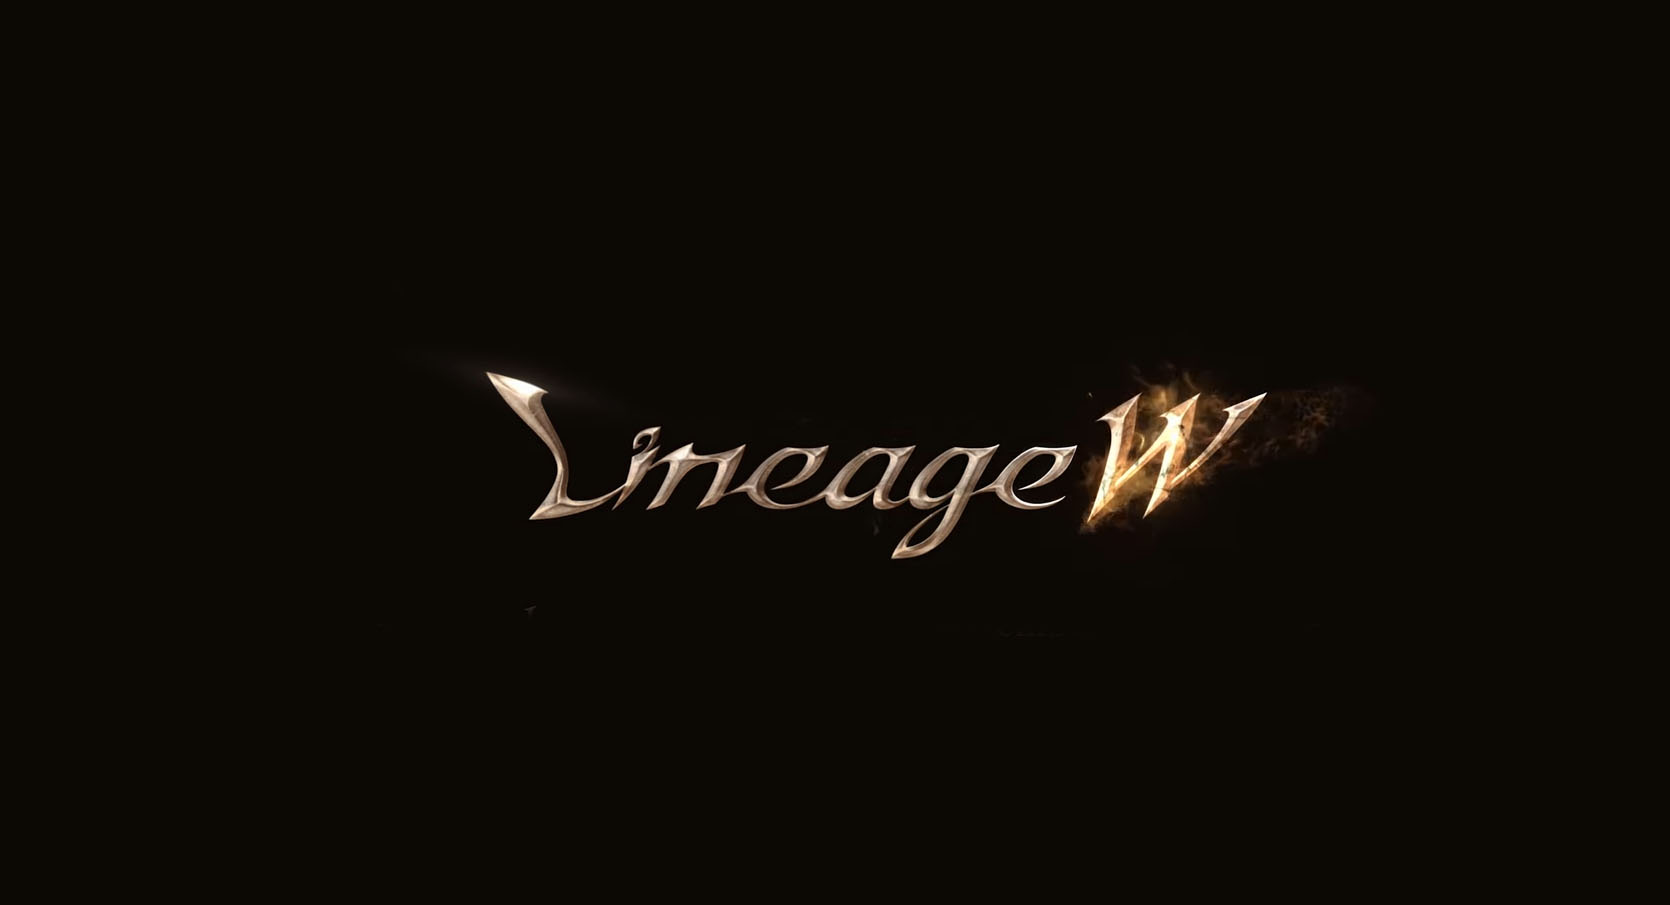 Full version of Android MMORPGs game apk Lineage W for tablet and phone.